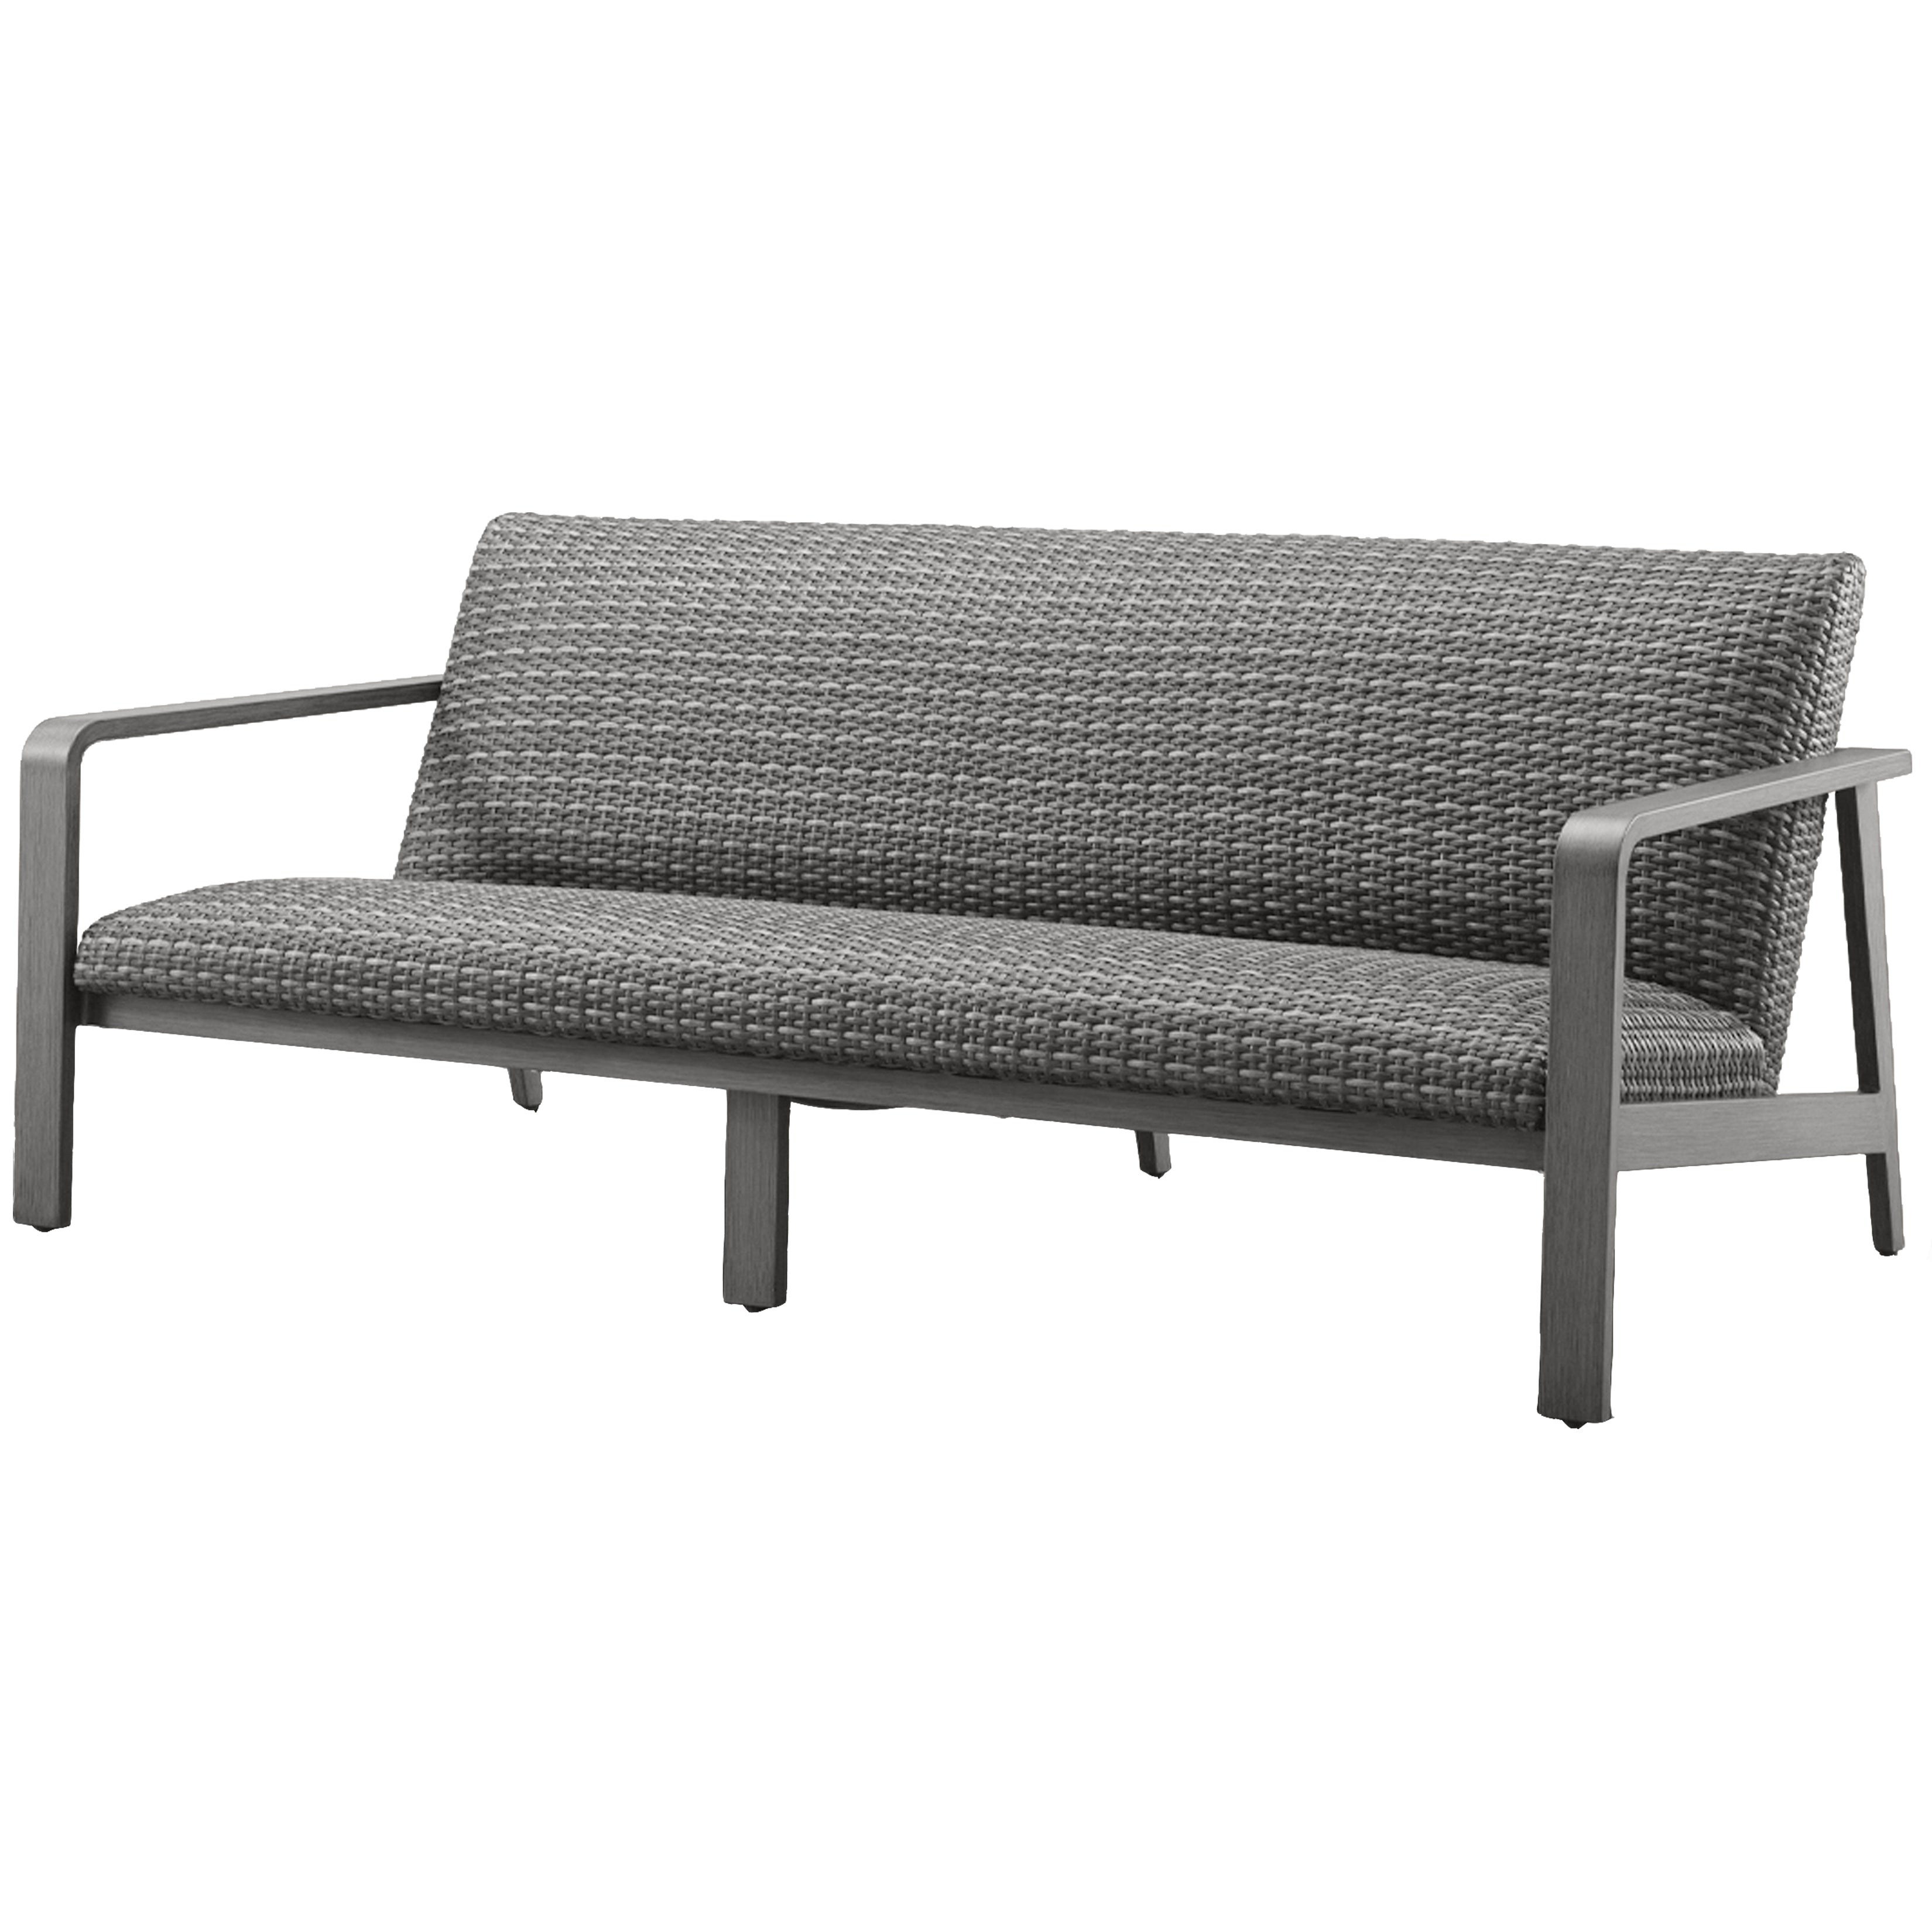 Canton Padded Adjustable Chaise Lounge